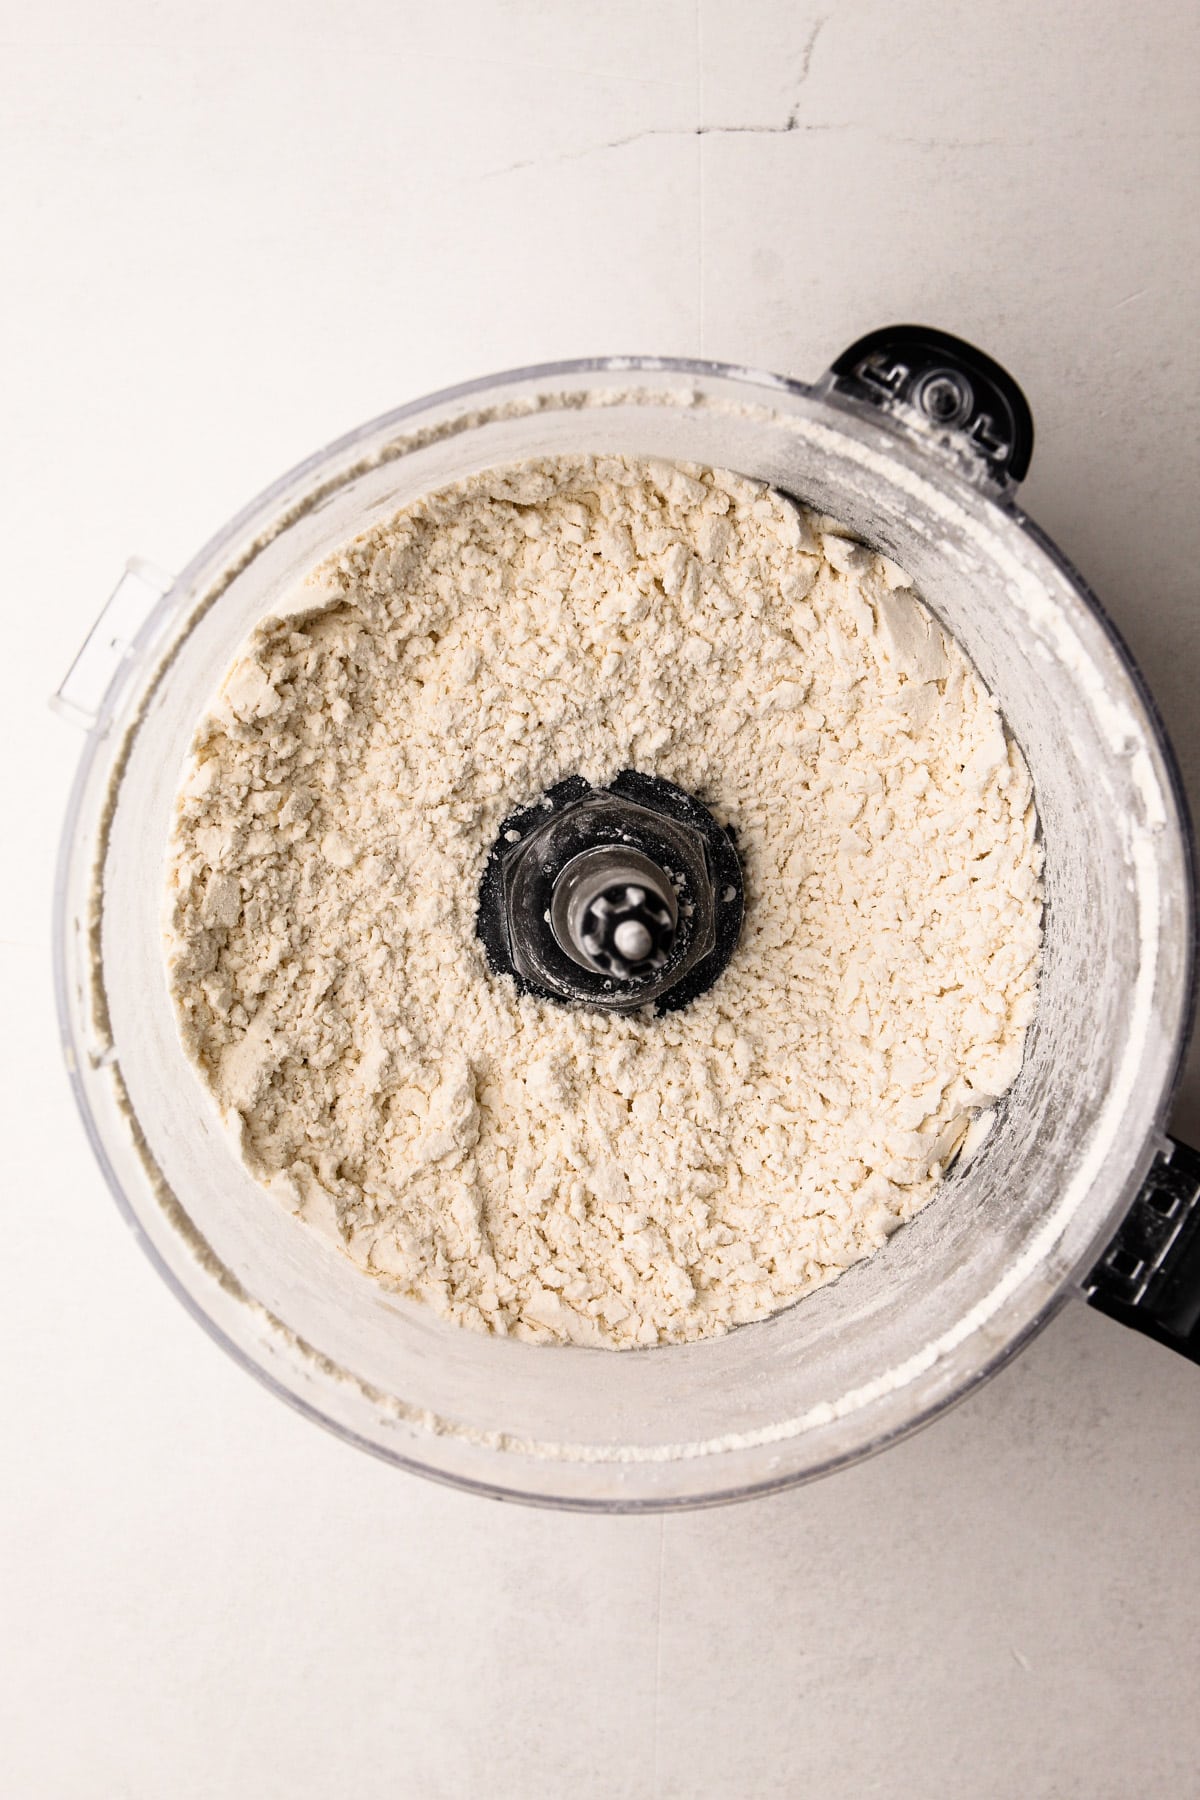 Processed flour and cream cheese in a food processor.